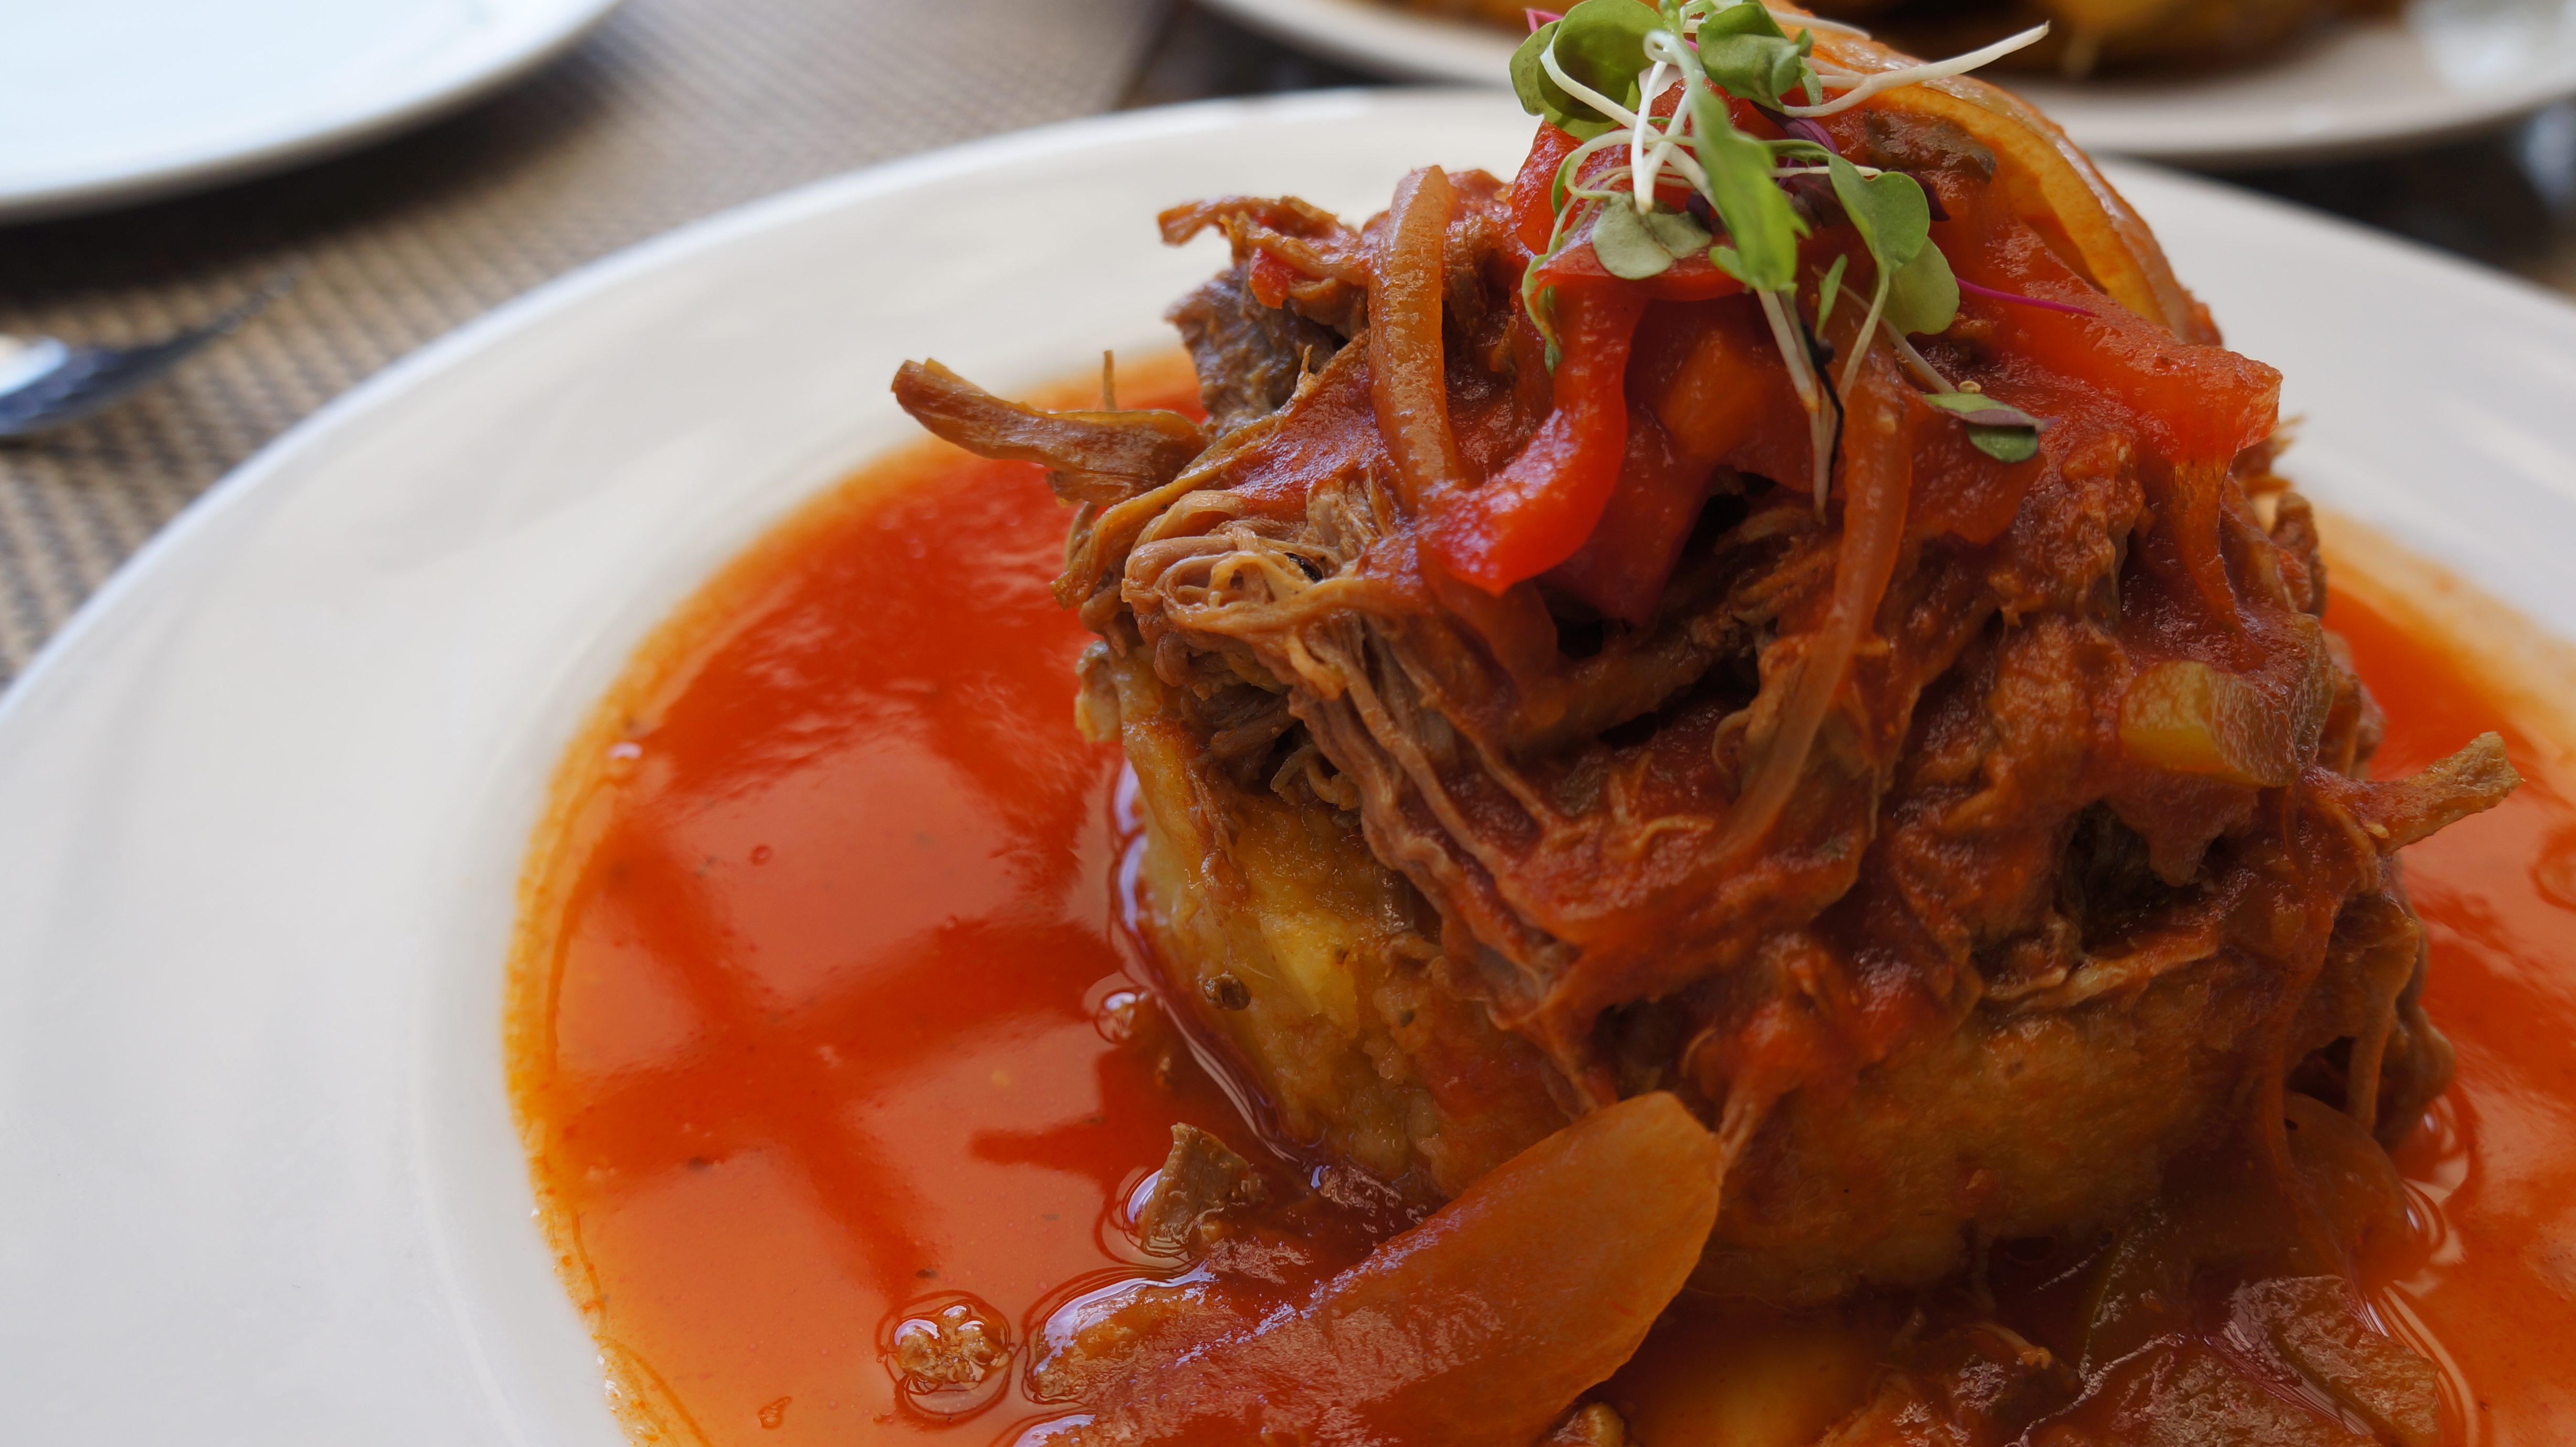 Mofongo covered in a tomato based sauce